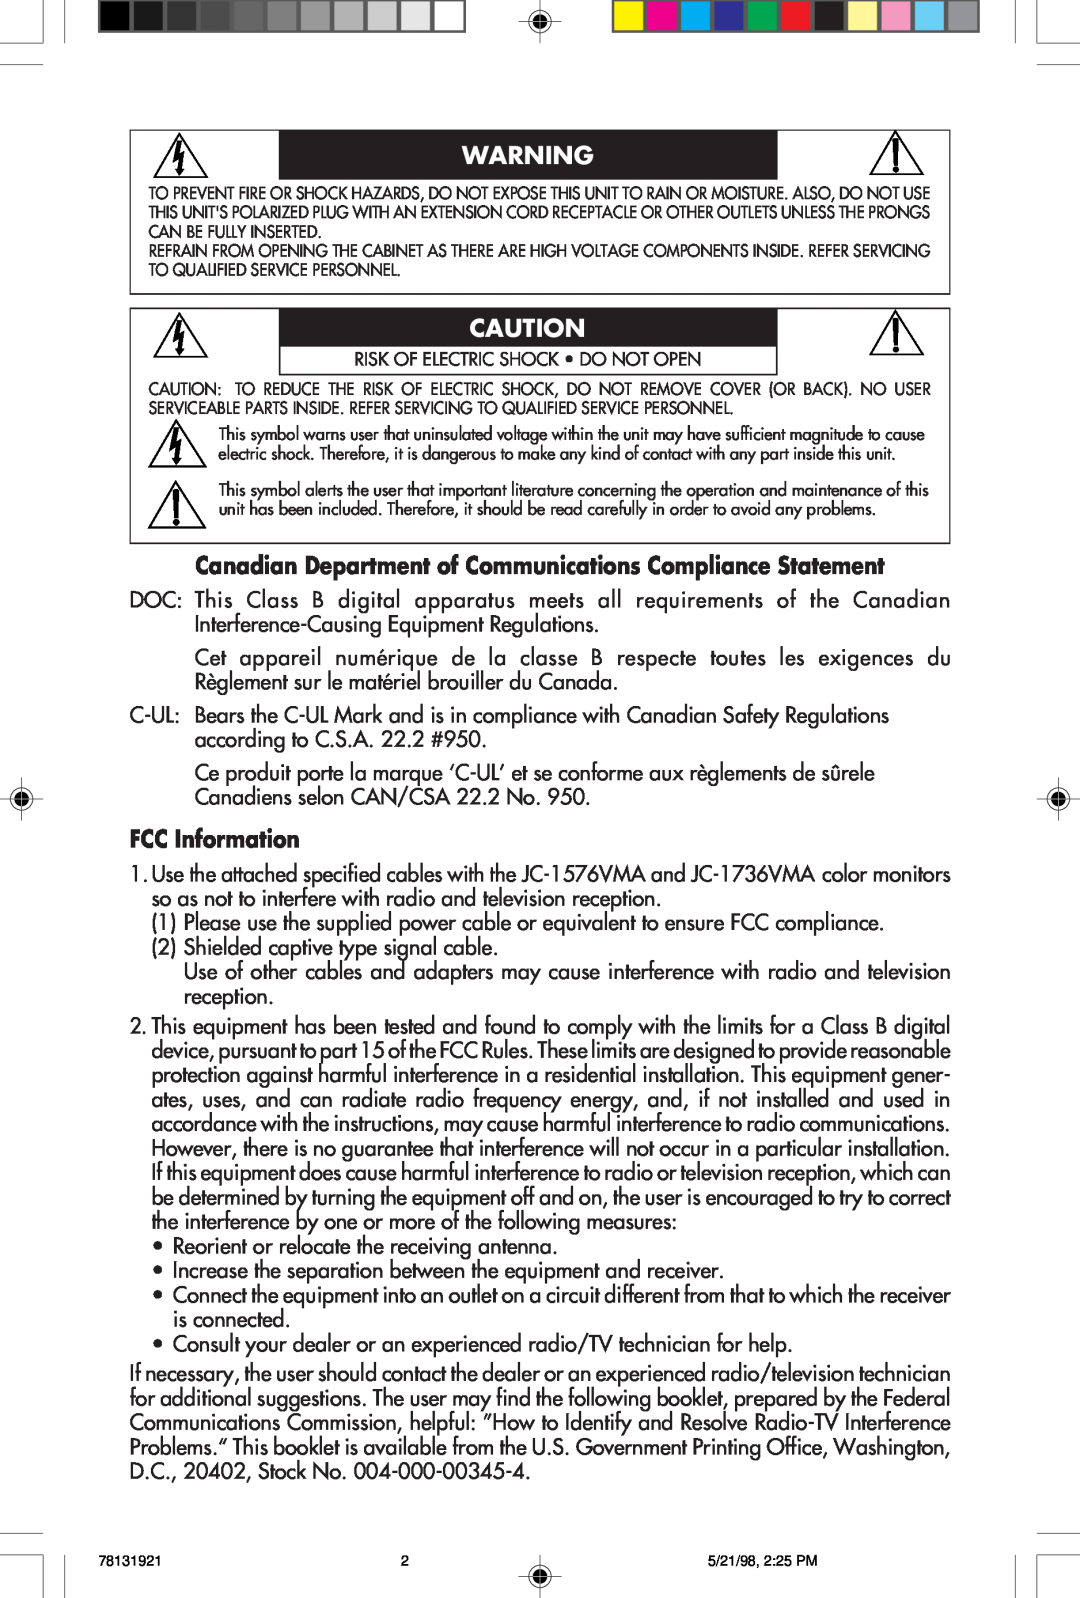 NEC A Series user manual Canadian Department of Communications Compliance Statement, FCC Information 